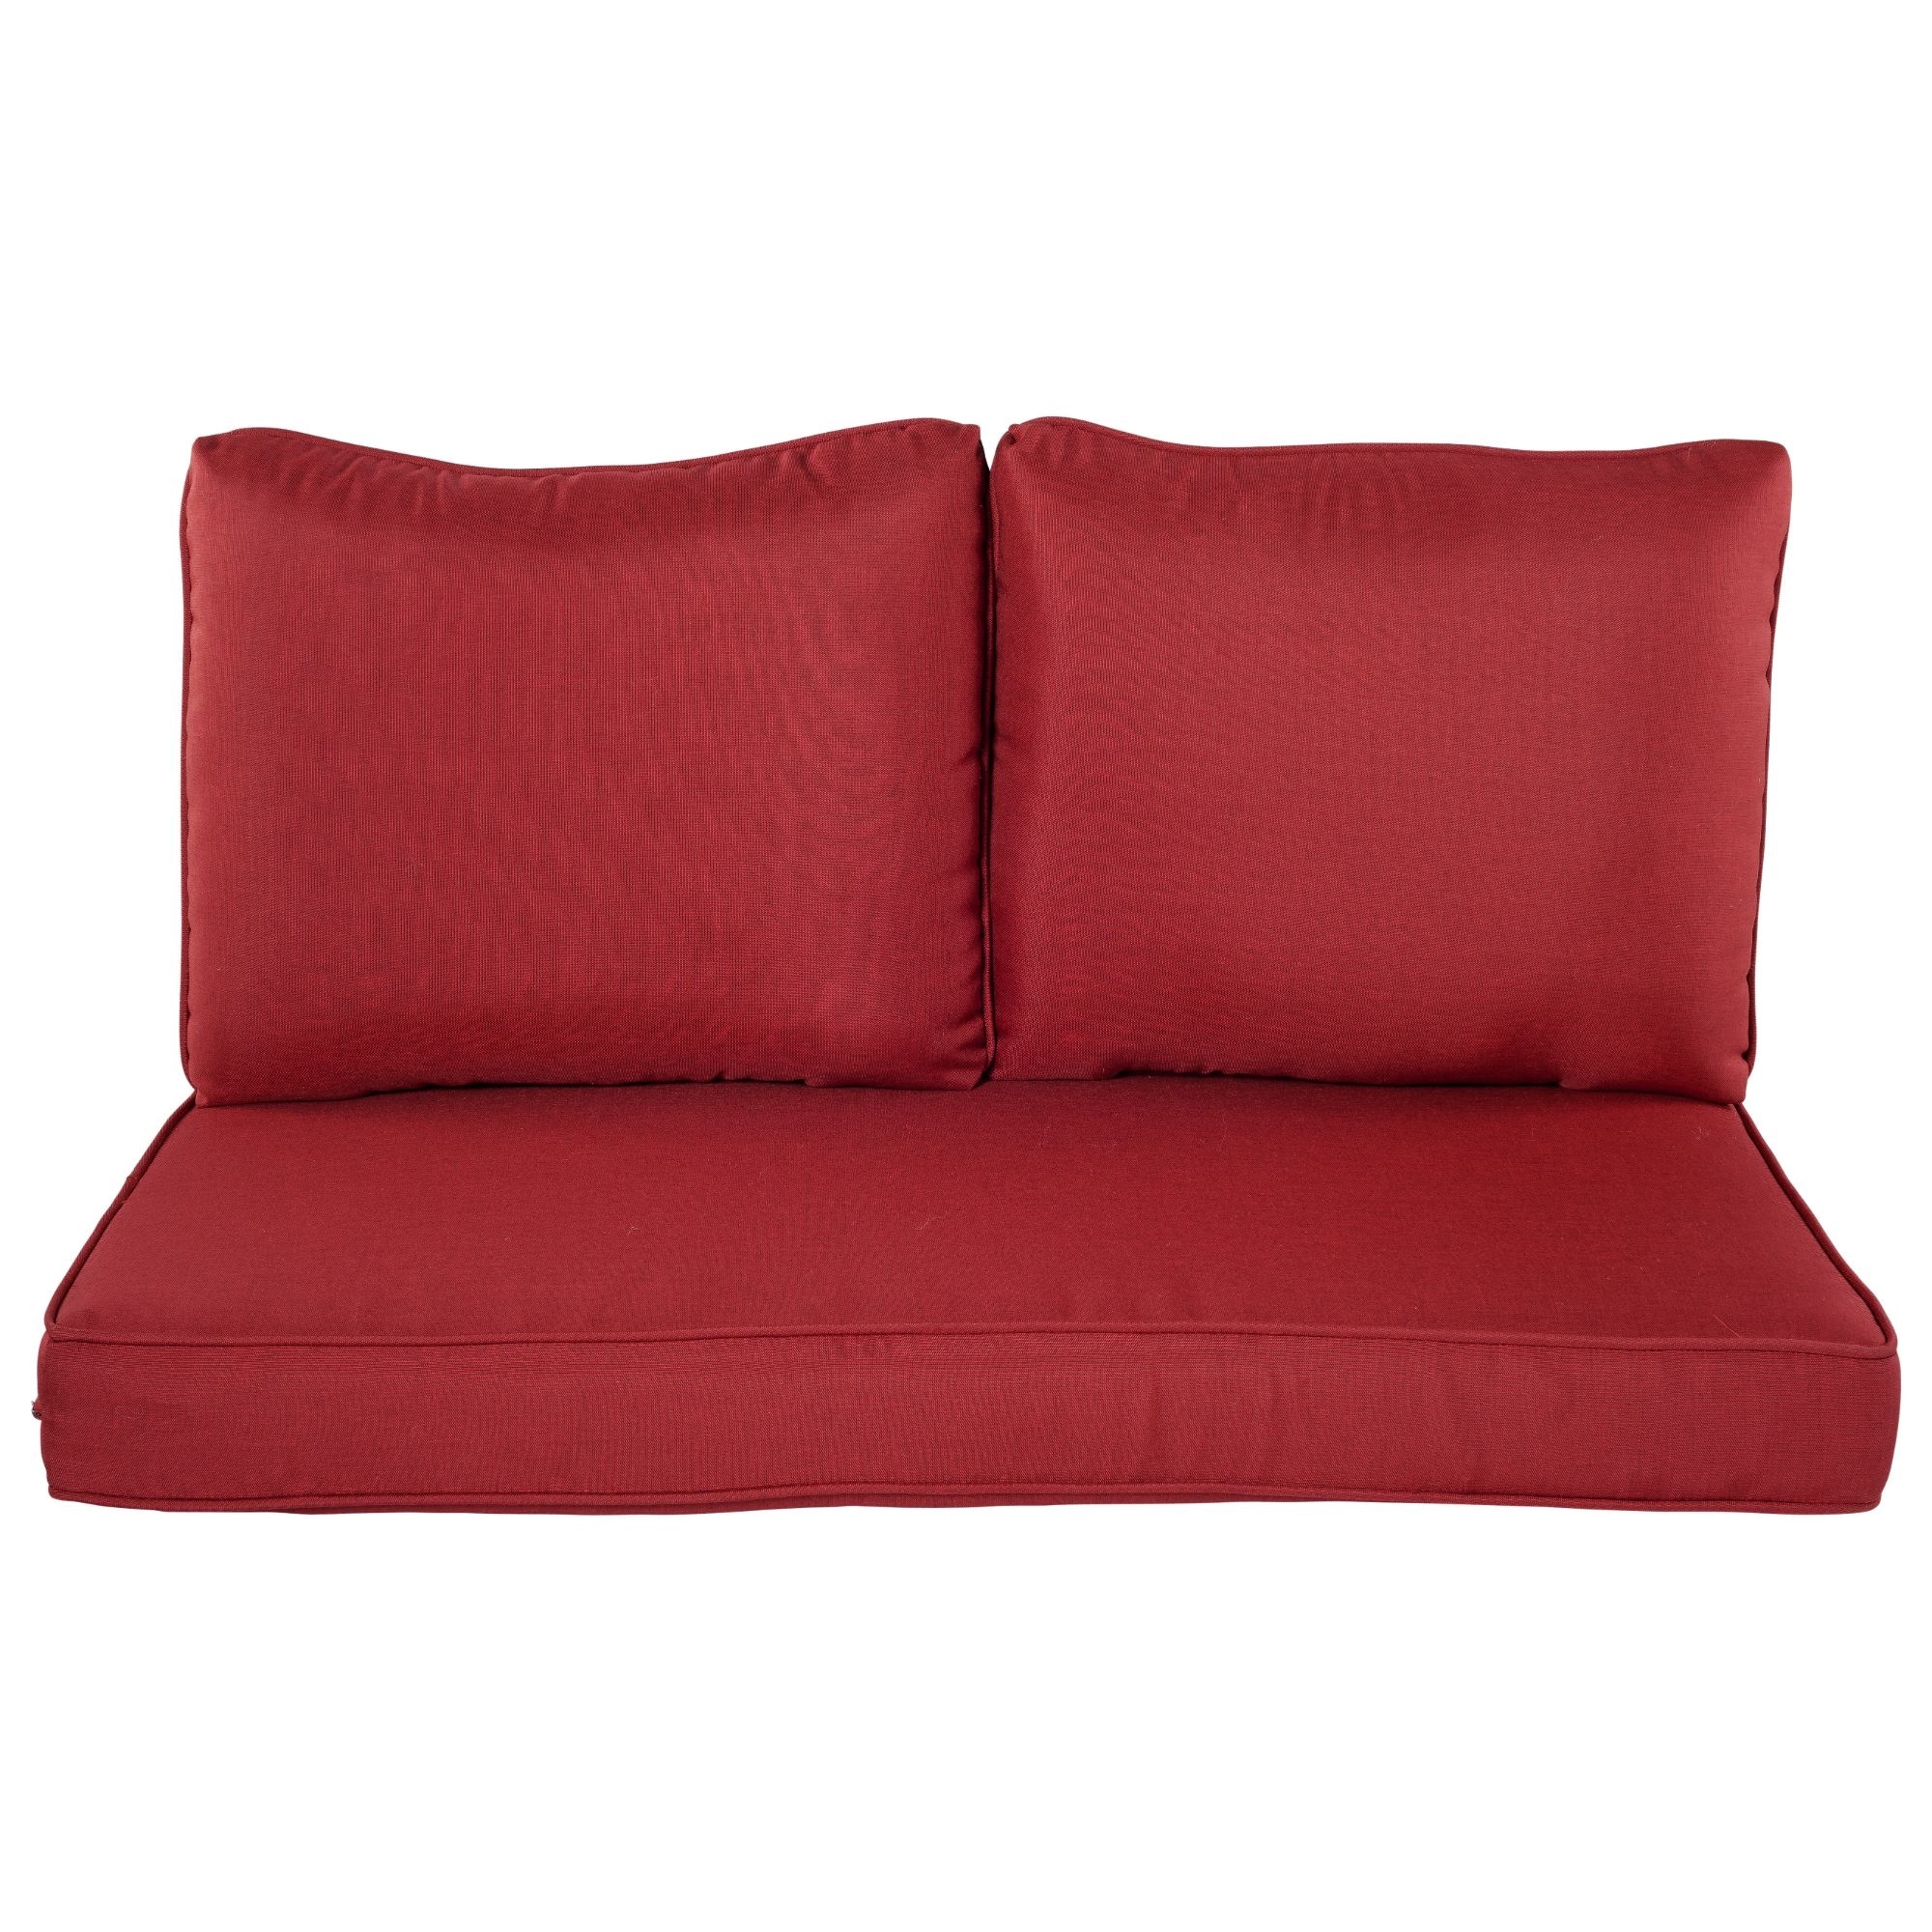 https://ak1.ostkcdn.com/images/products/is/images/direct/c5f6d7b4ca94500eb48159ba8ba47e1c1d4515c1/Haven-Way-Loveseat-Cushion-Set.jpg